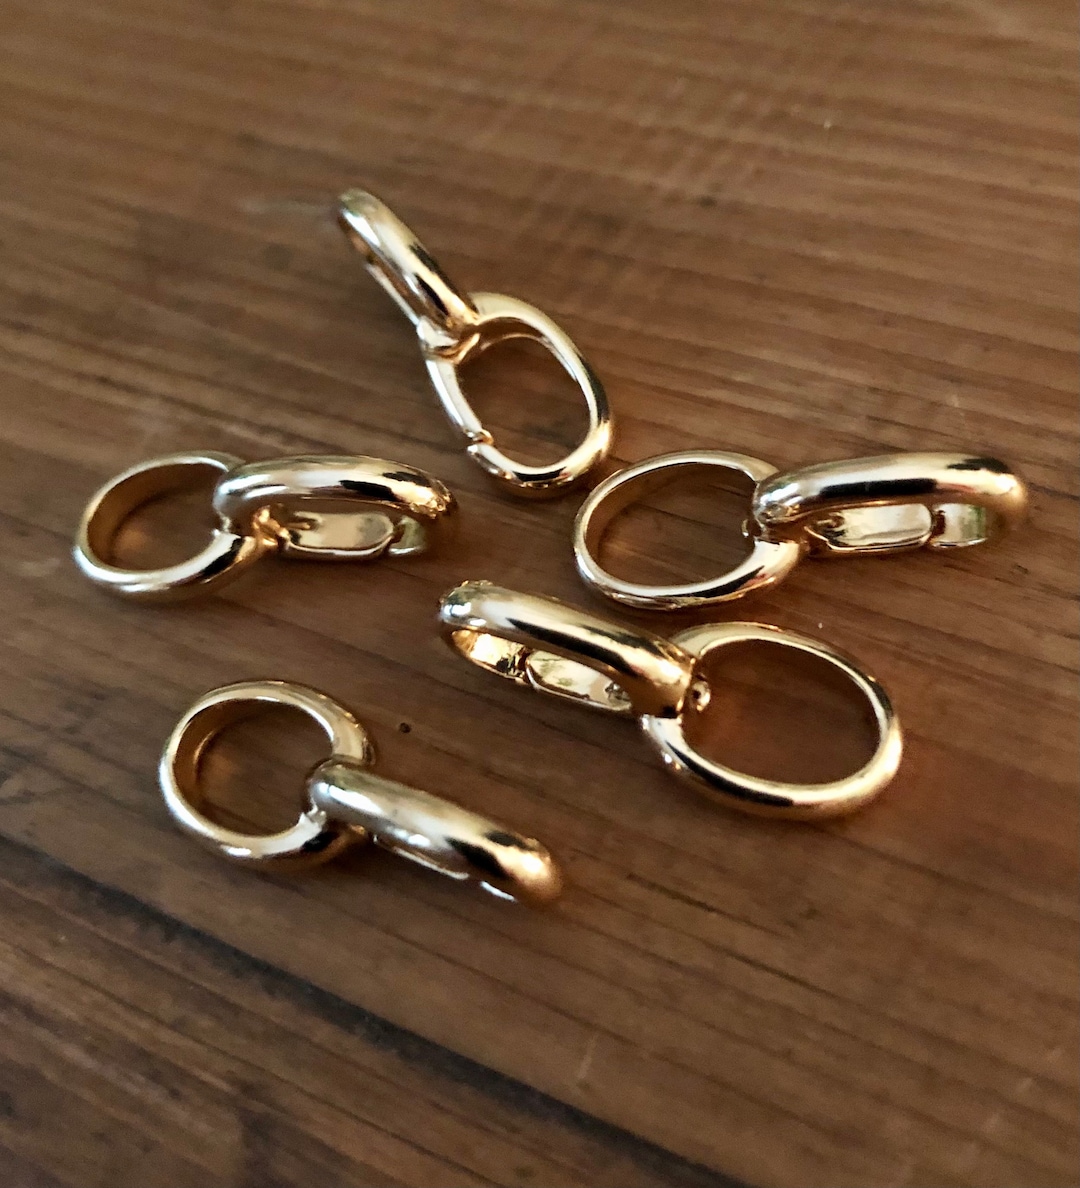 VILLCASE 3 pcs Necklace Jewelry Buckle Necklace Carabiner Buckle Star  Charms Gold Keychain Clip Jewelry Screw Lock Necklace Link Connector Charms  Star